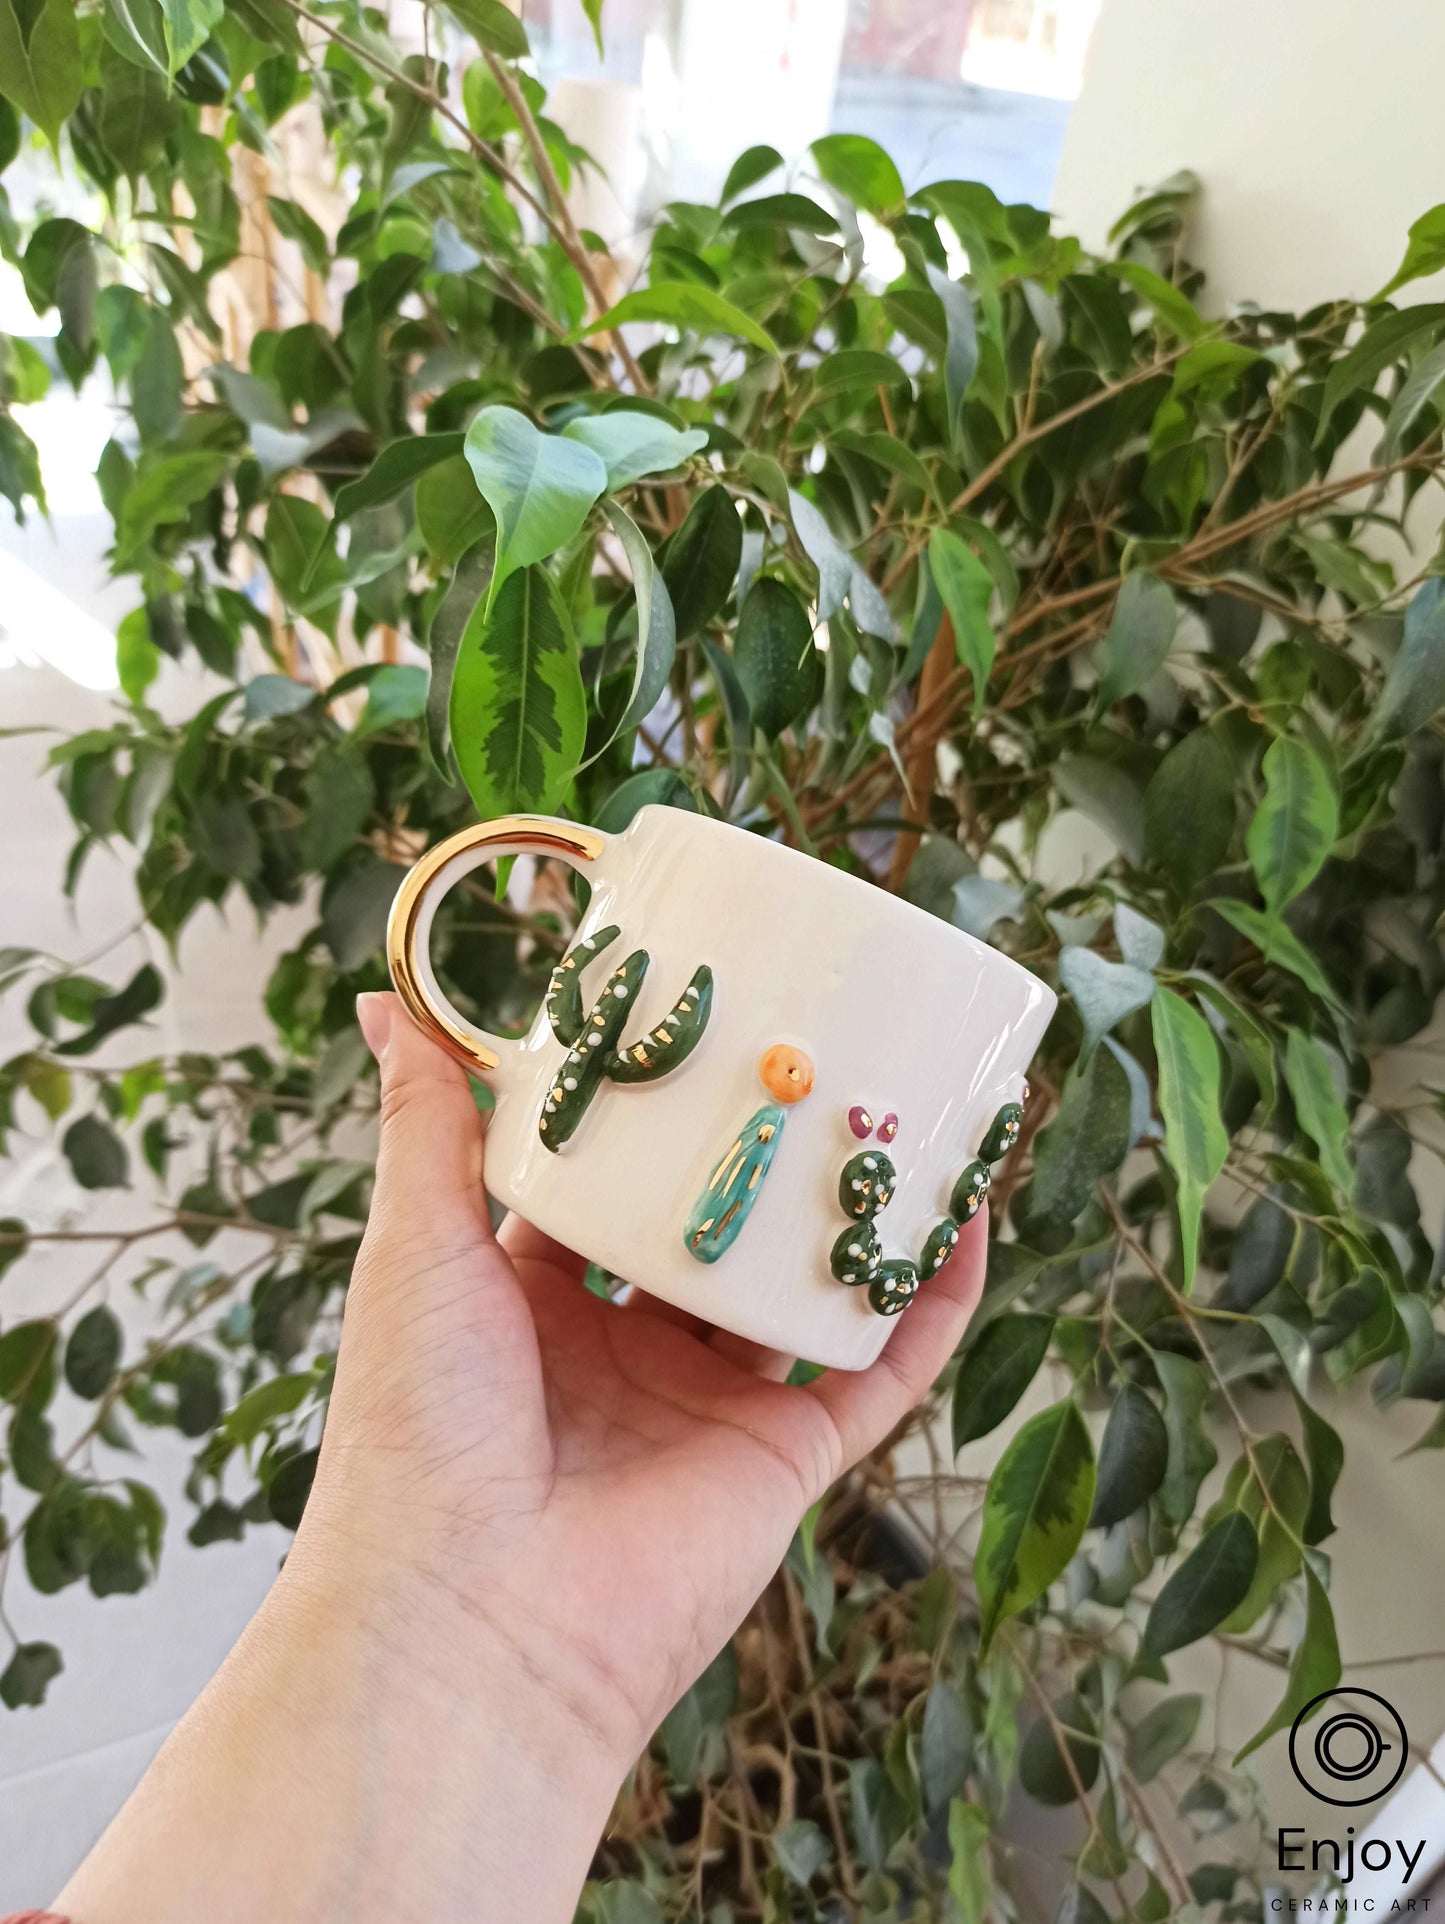 a hand holding a white ceramic mug adorned with three-dimensional cactus designs and a golden handle. It's set against a backdrop of leafy indoor plants, highlighting the mug's artistic nature-inspired embellishments.